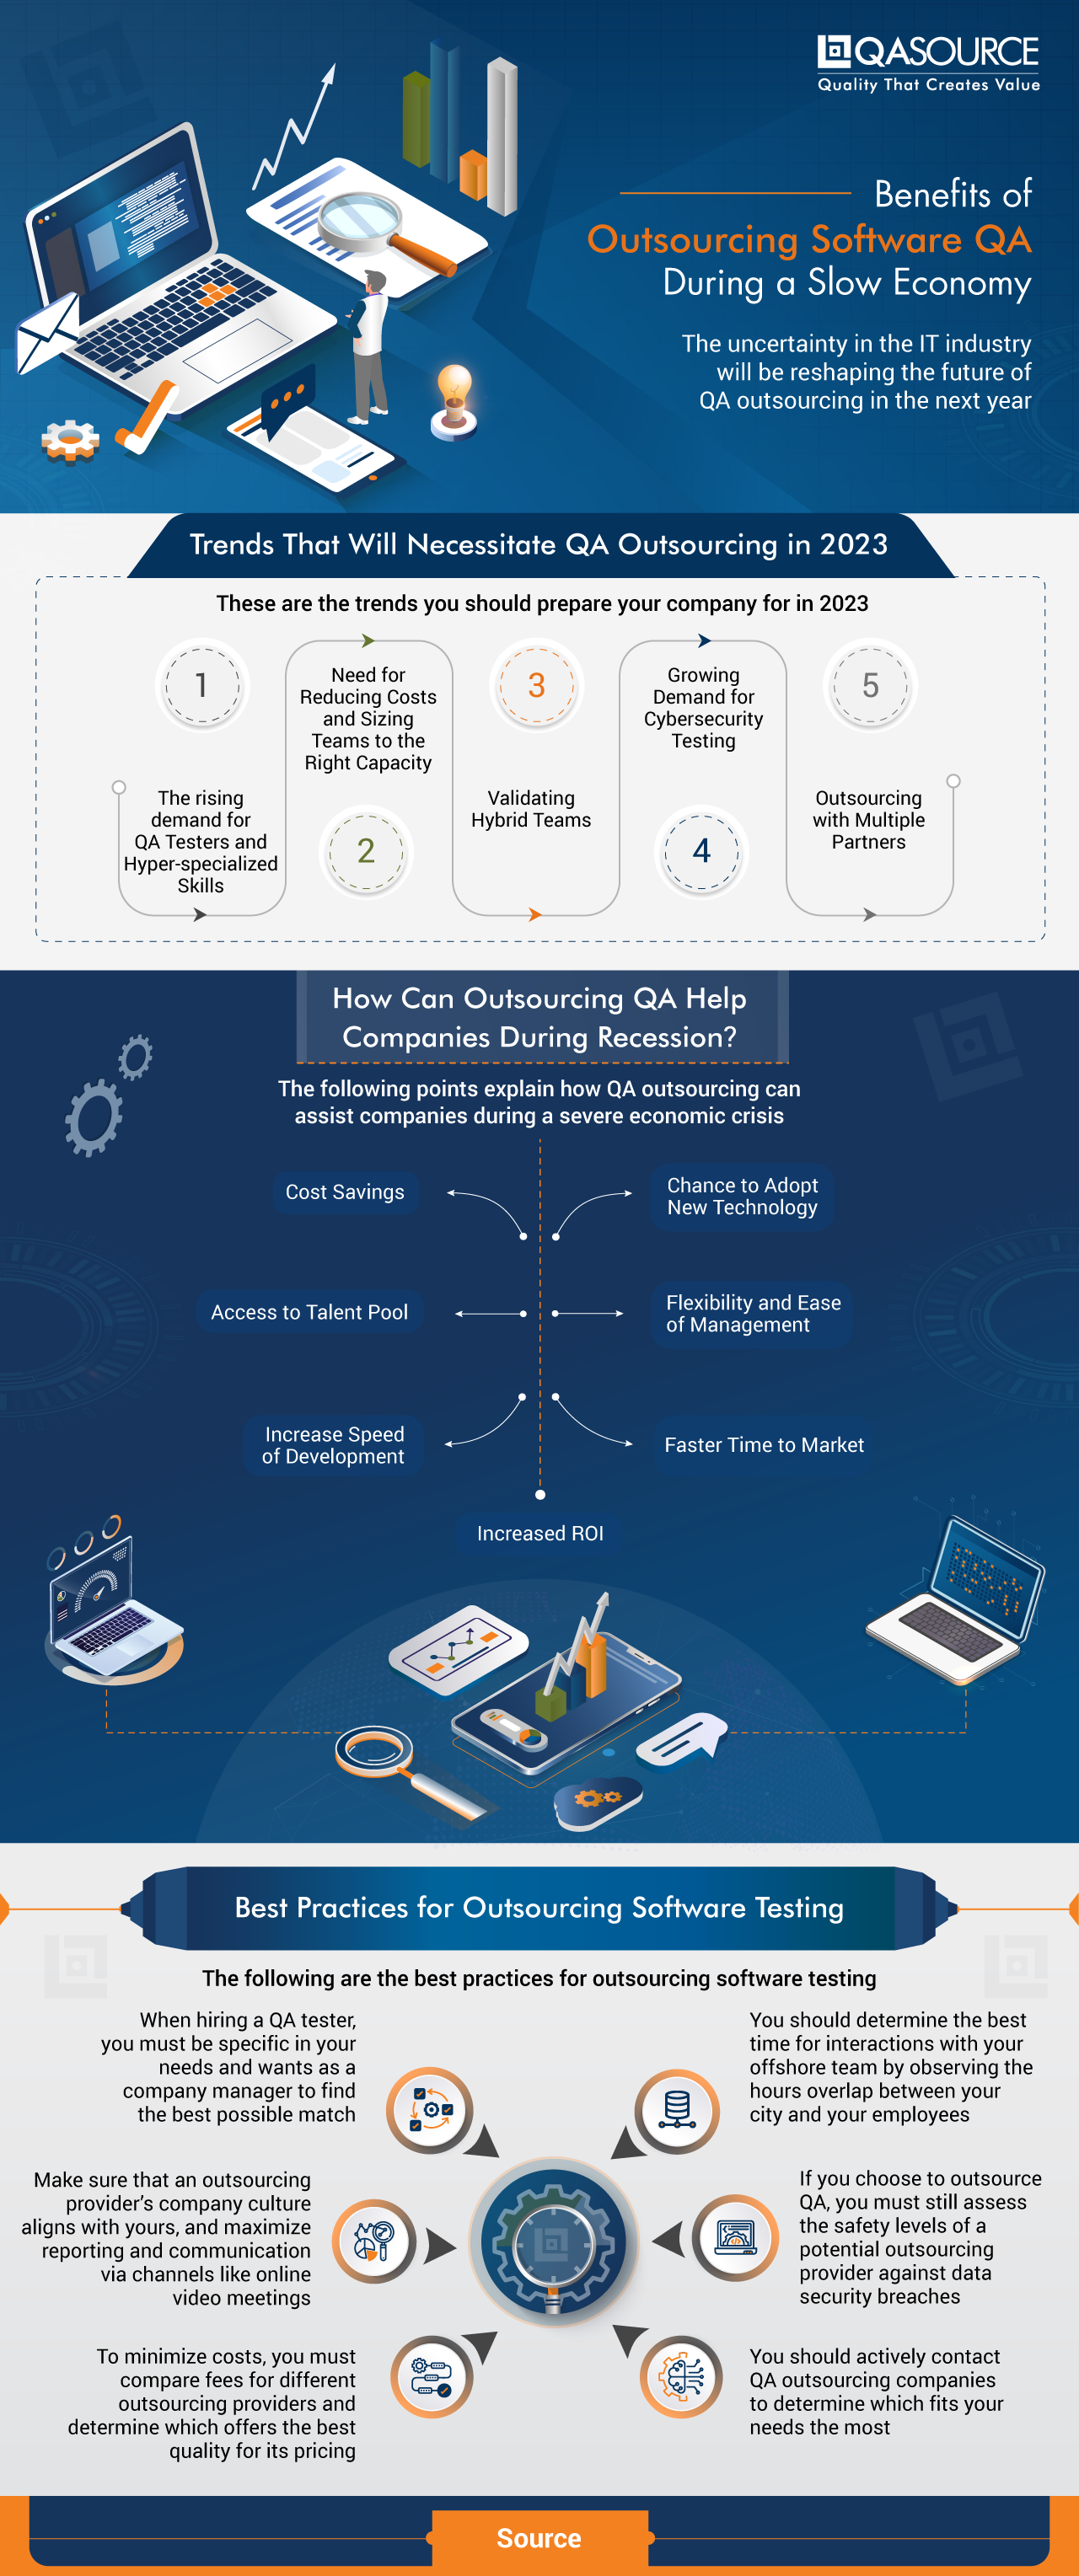 Benefits of Outsourcing Software QA During a Slow Economy (Infographic)